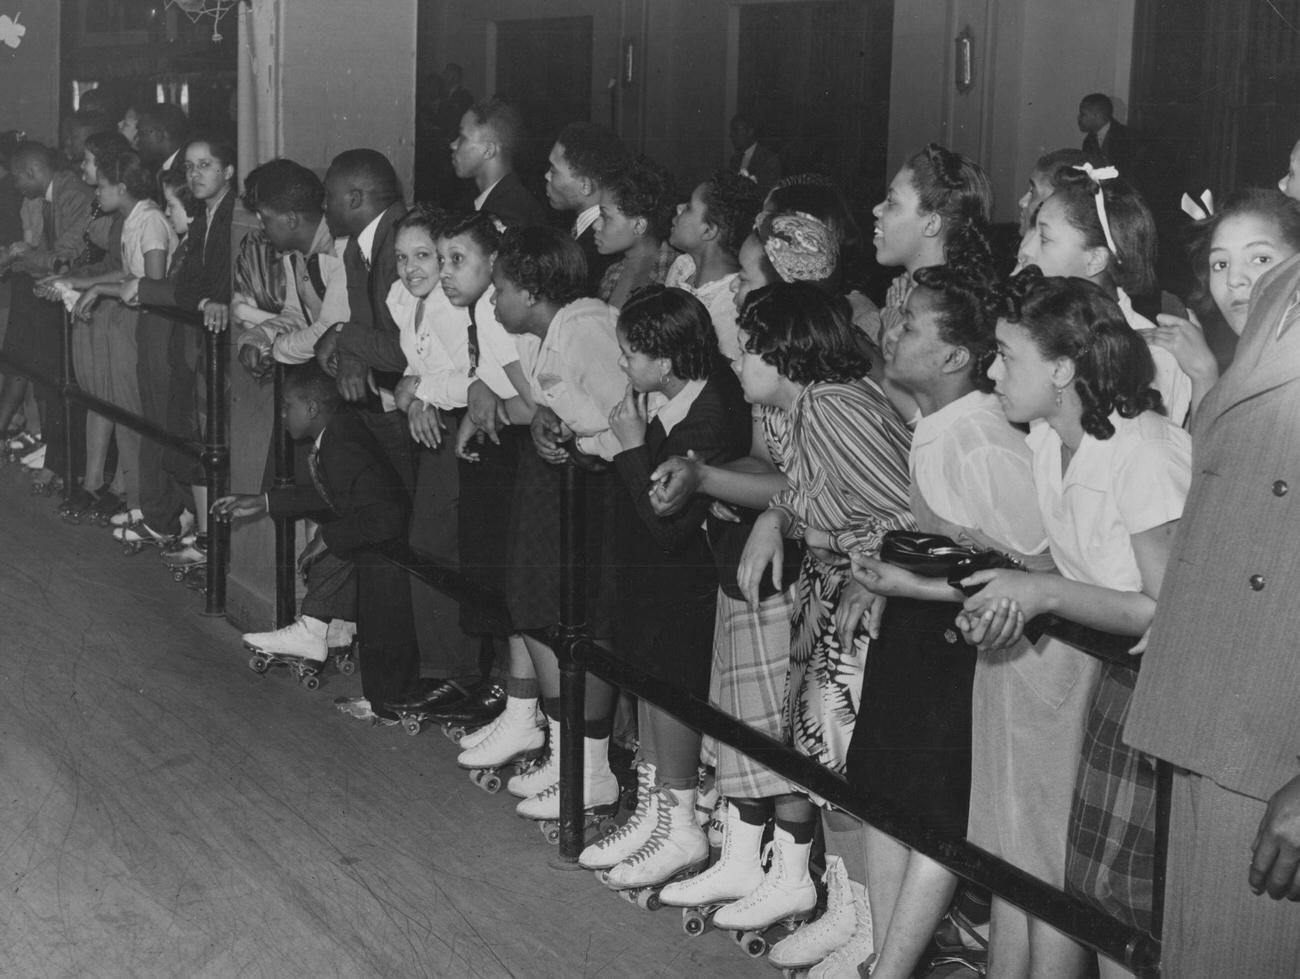 African-American Children on Skates at an Event, Chicago, Illinois, 1935.